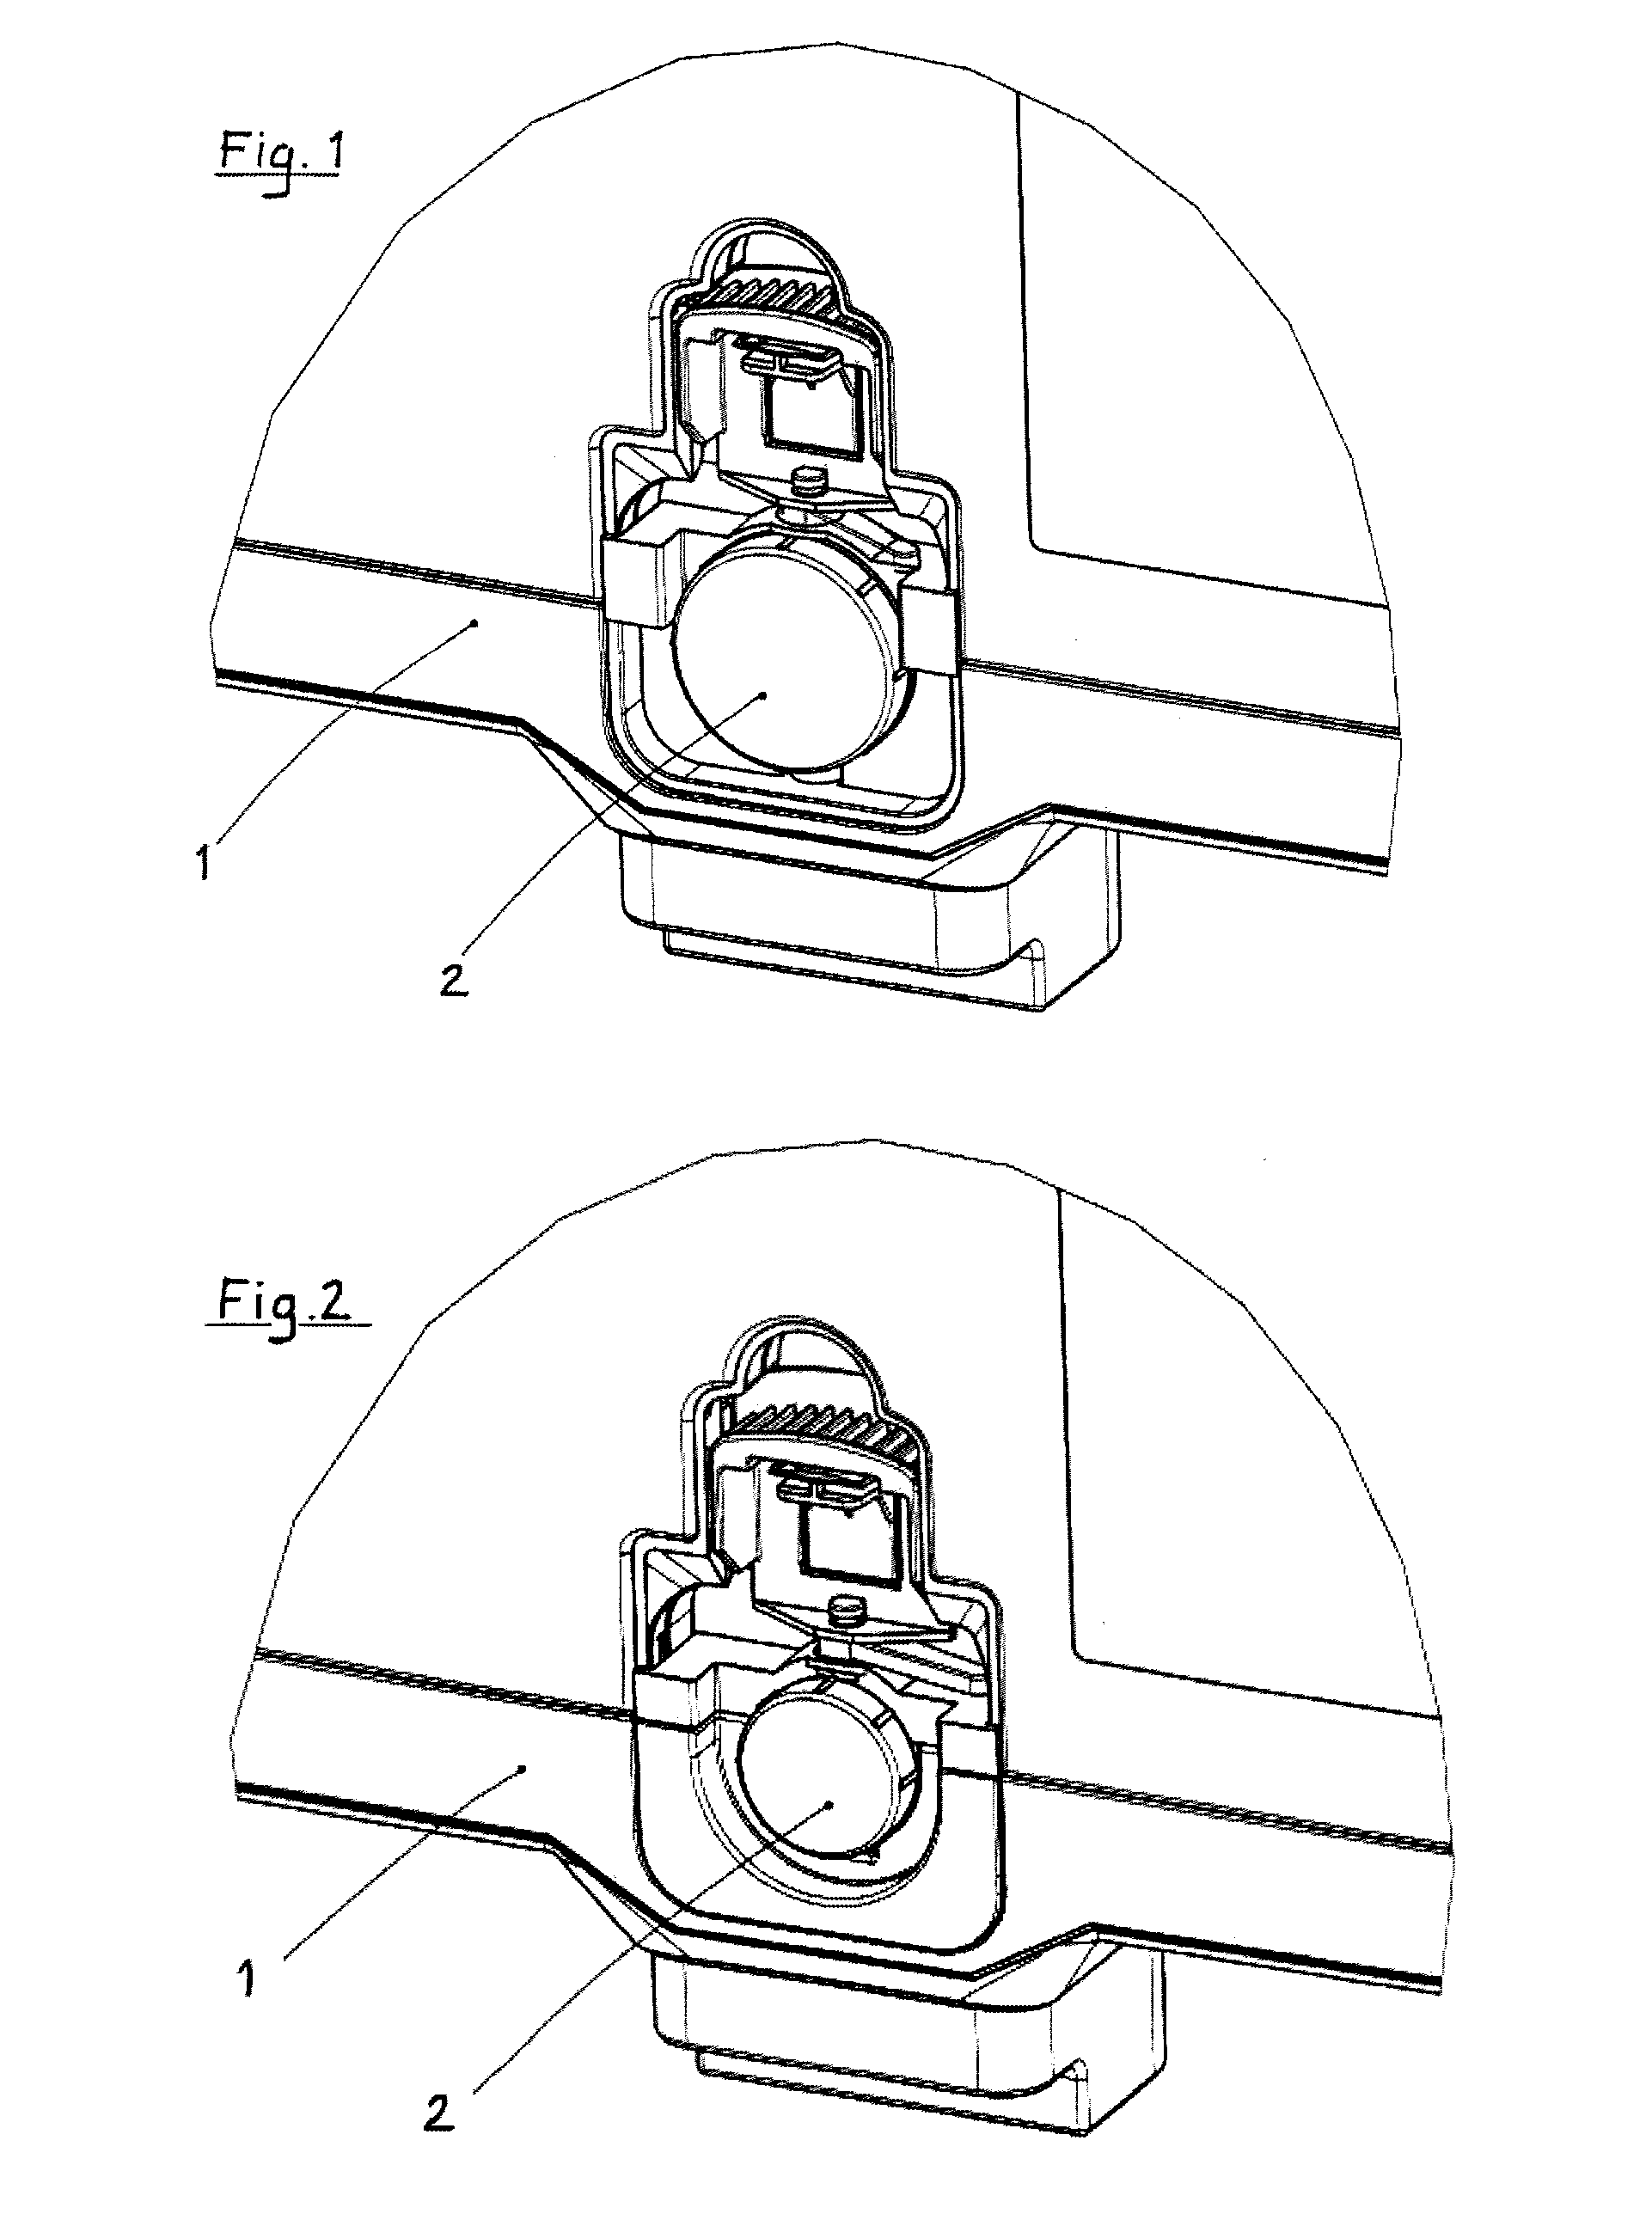 Valve assembly intended for use together with a pallet container and a liner